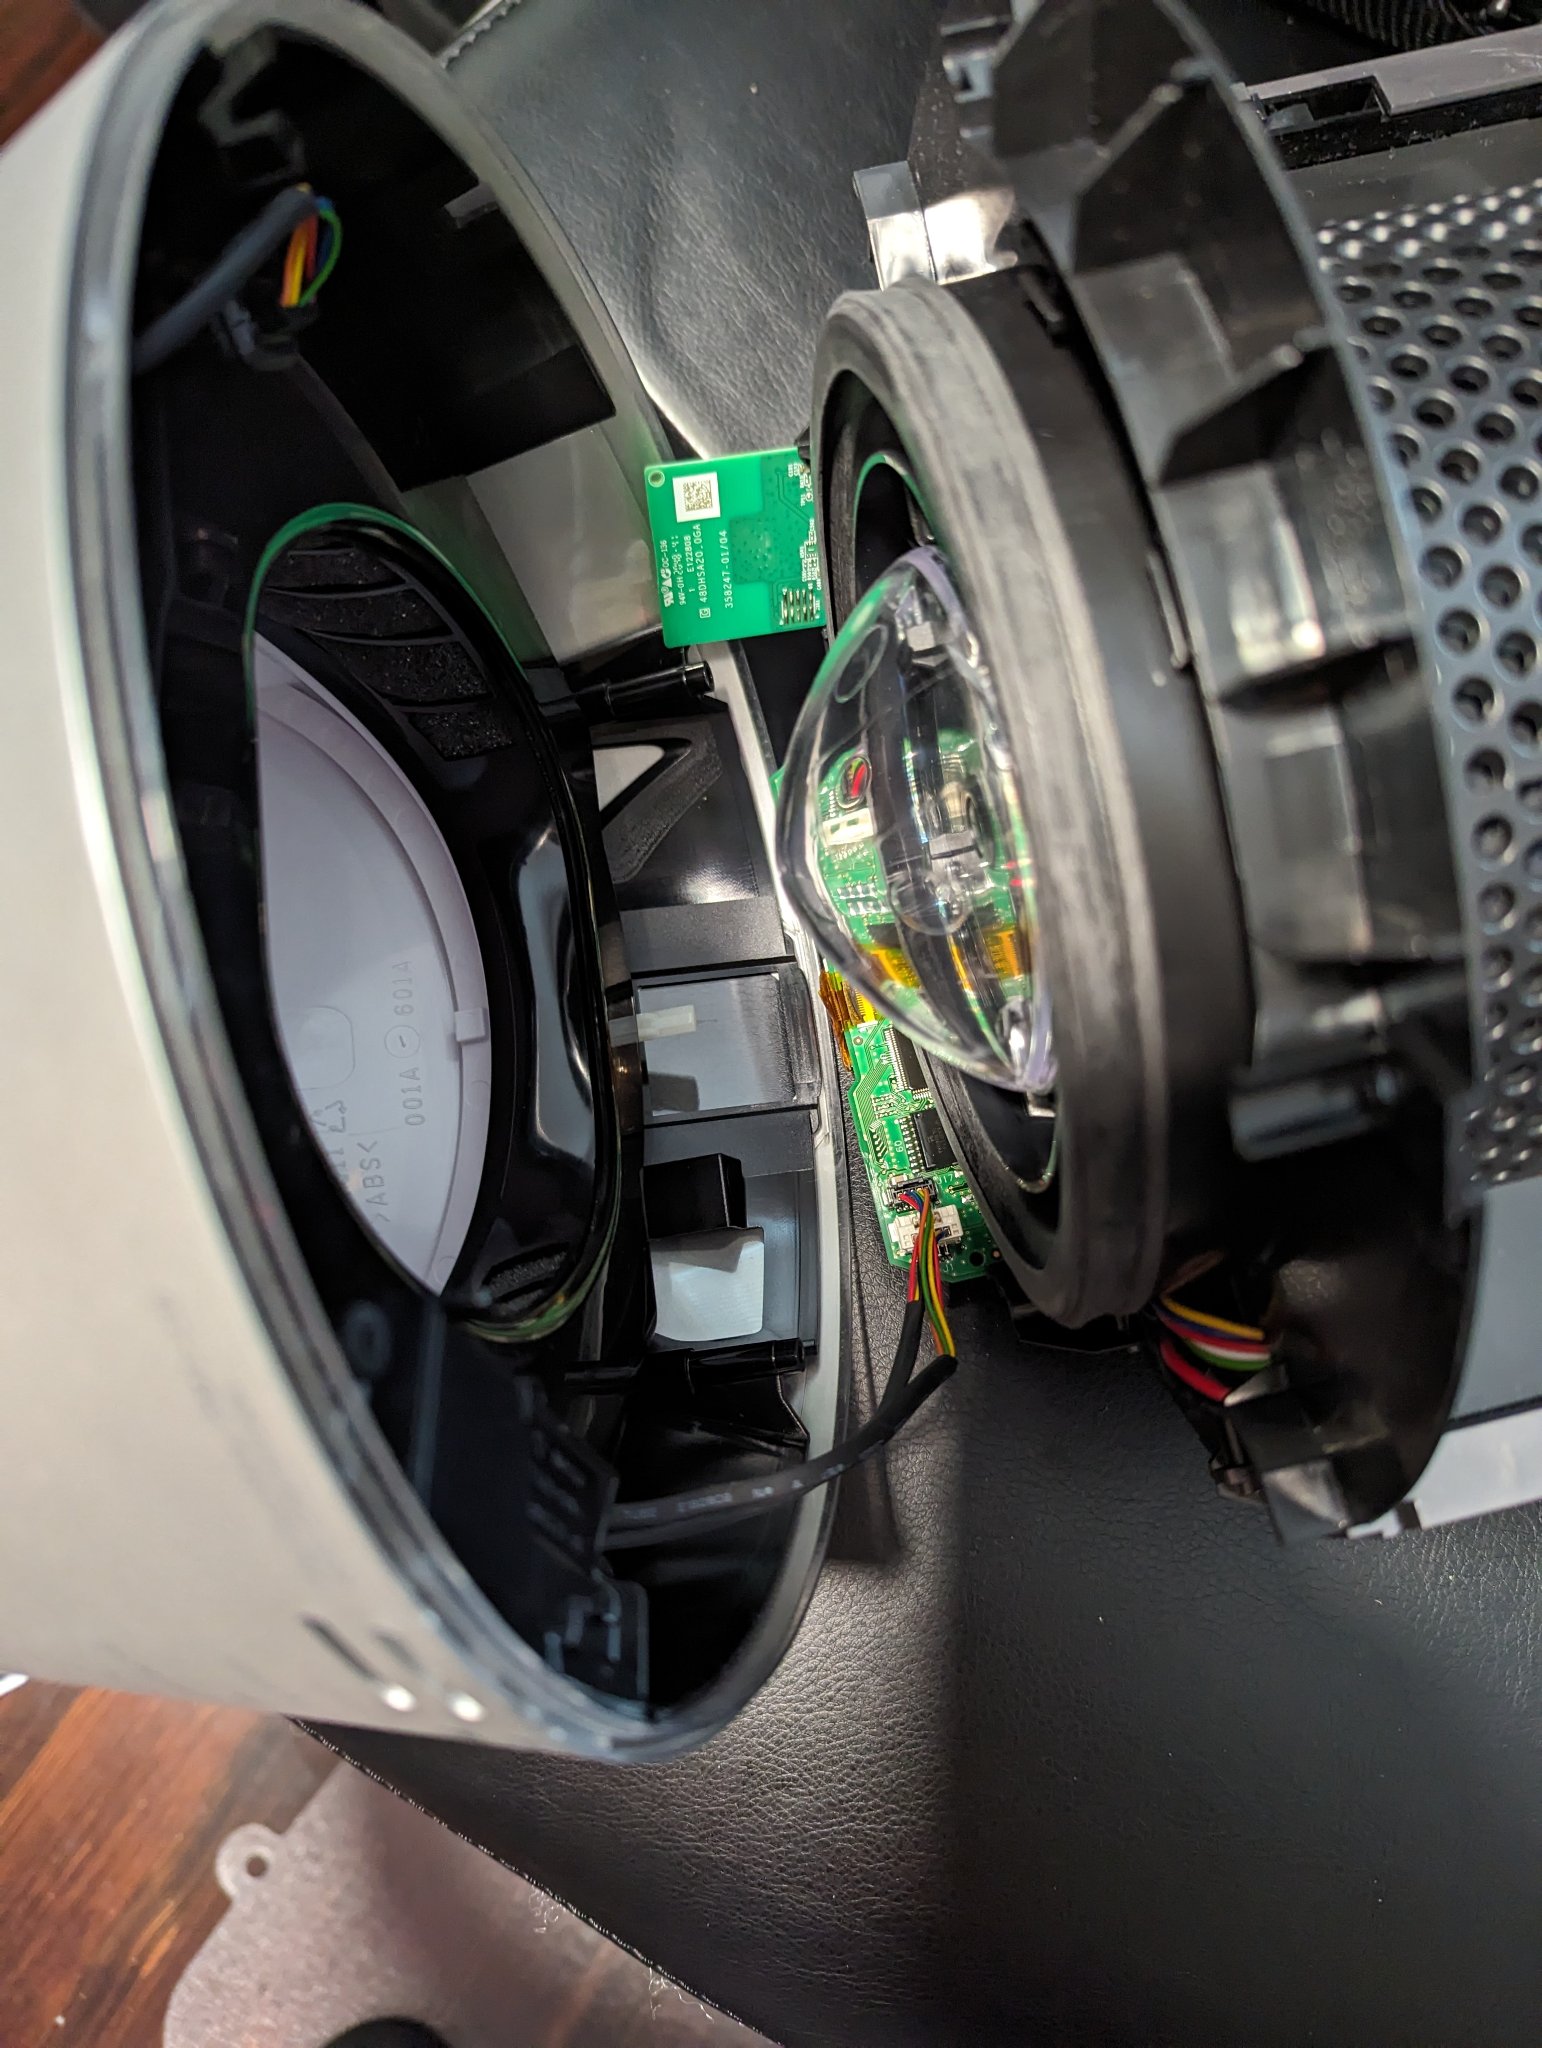 The connector between the air circulator and the main board